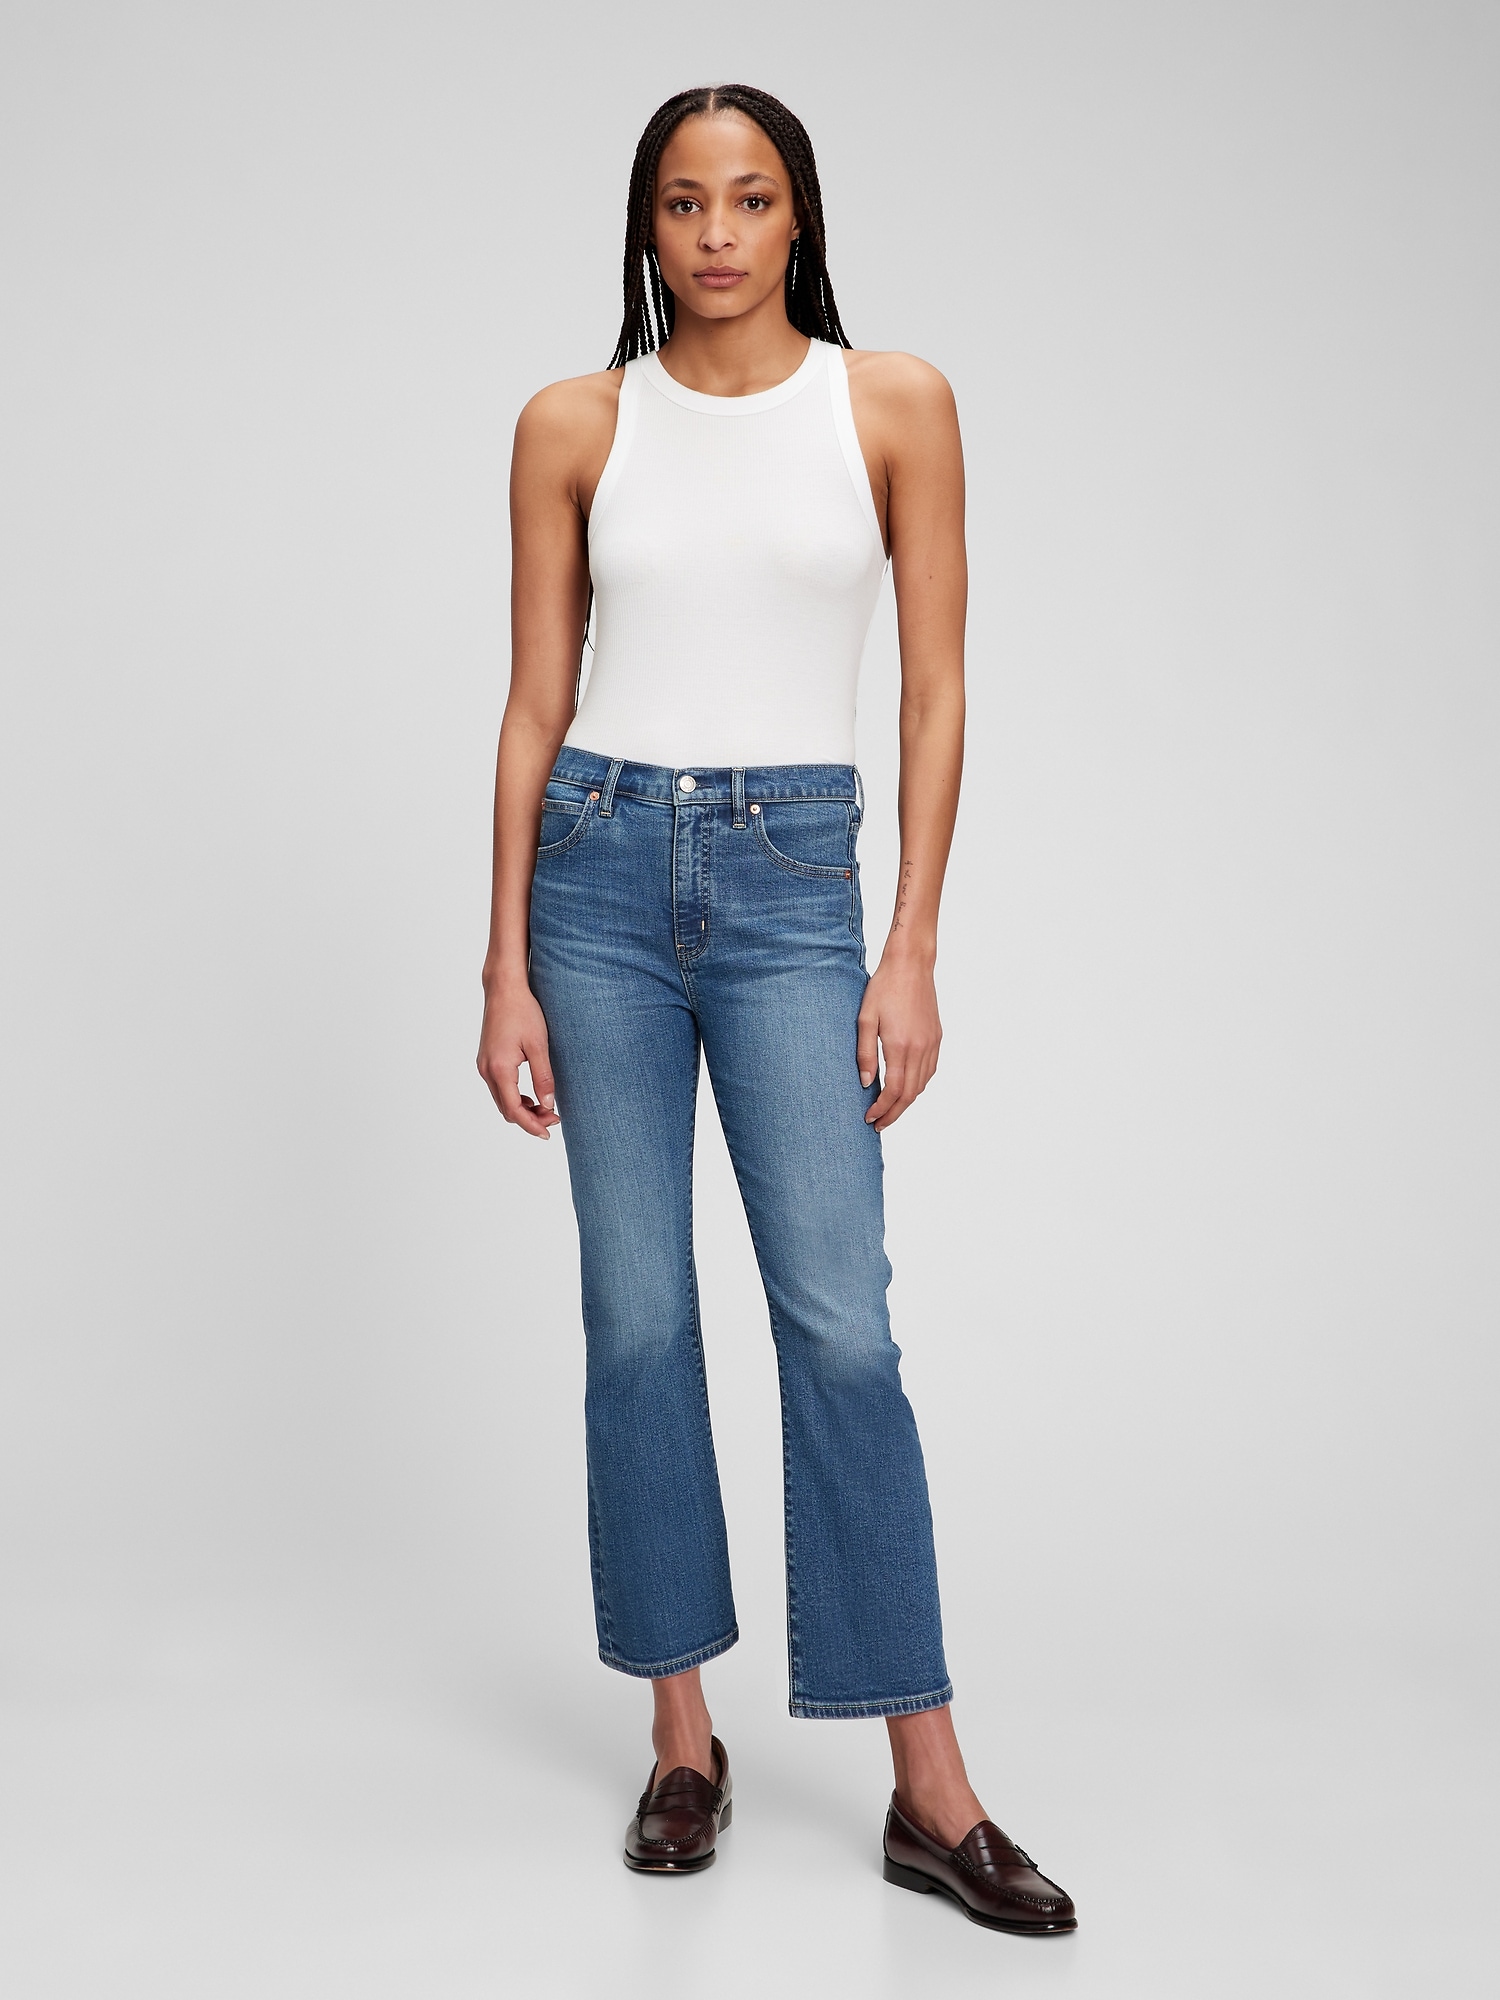 Gap High Rise Kick Fit Jeans With Washwell In Medium Wash